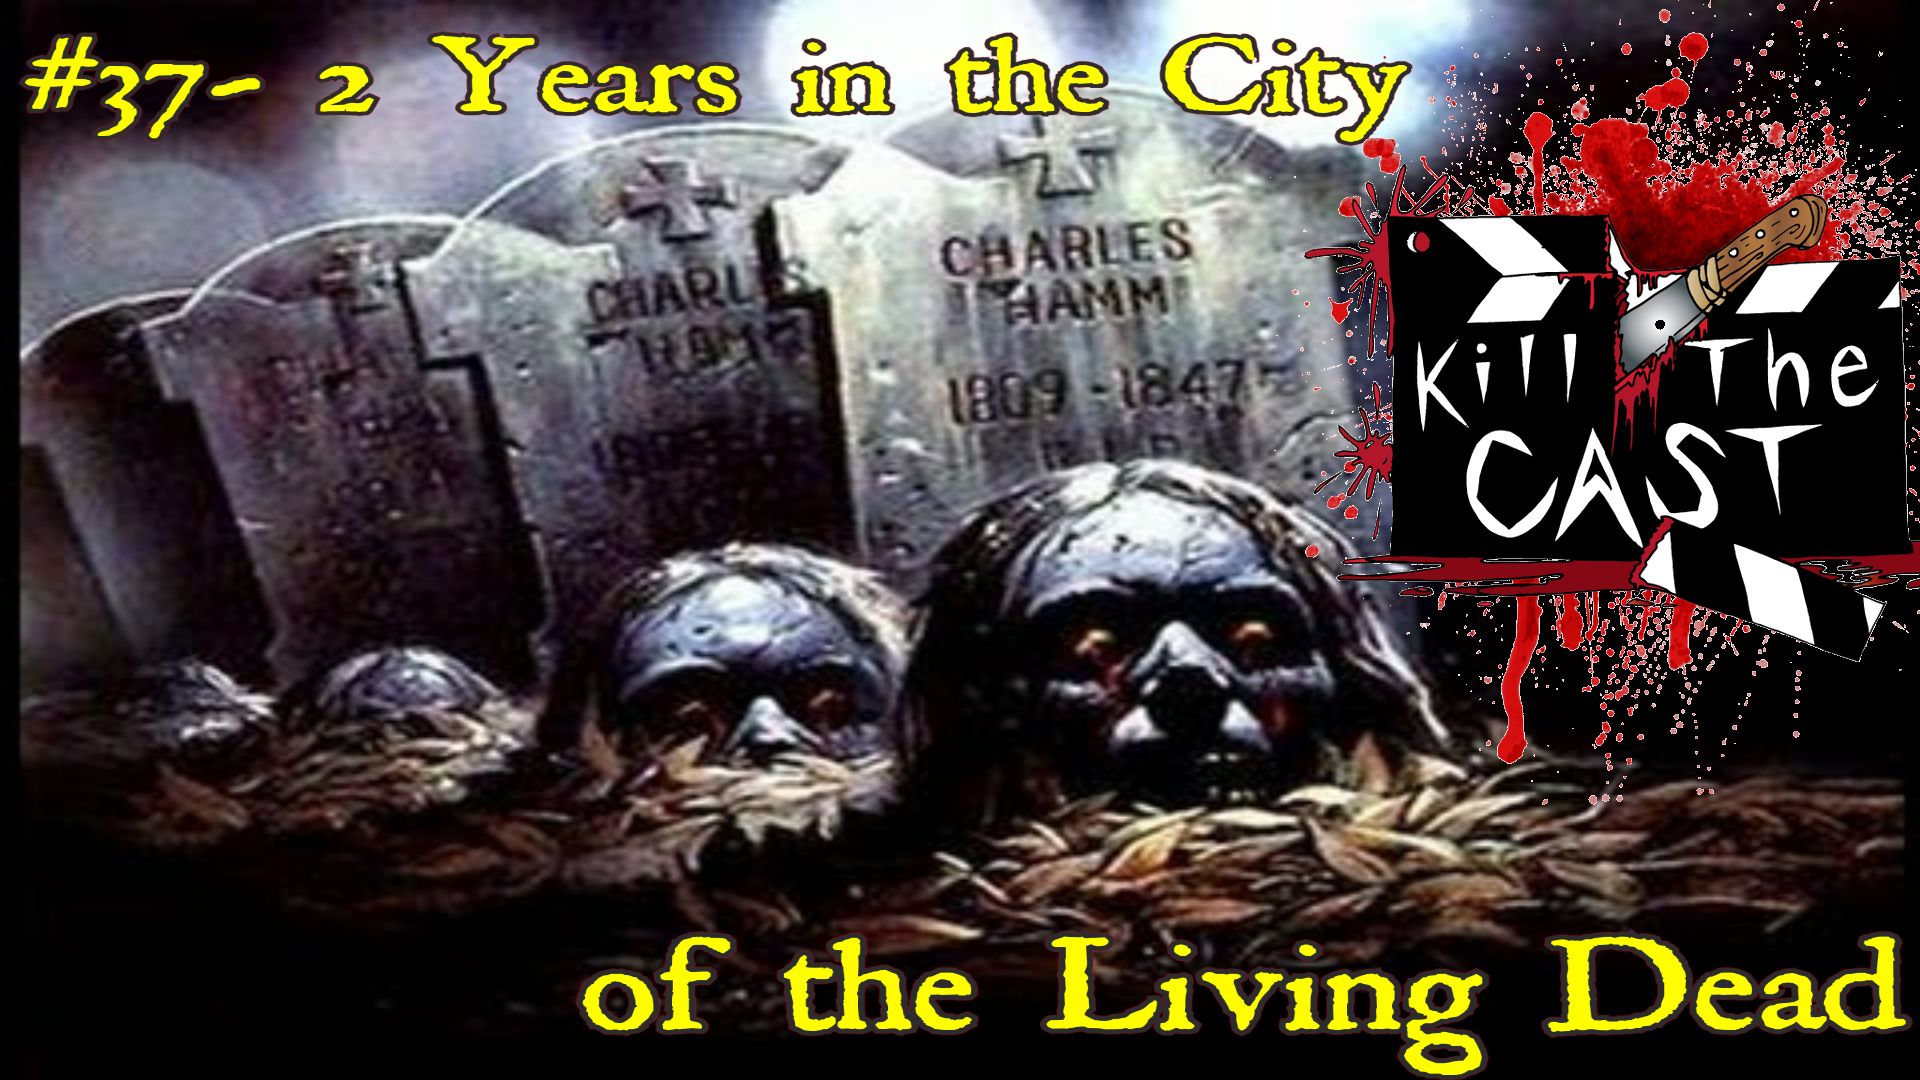 #37- 2 Years in the City of the Living Dead